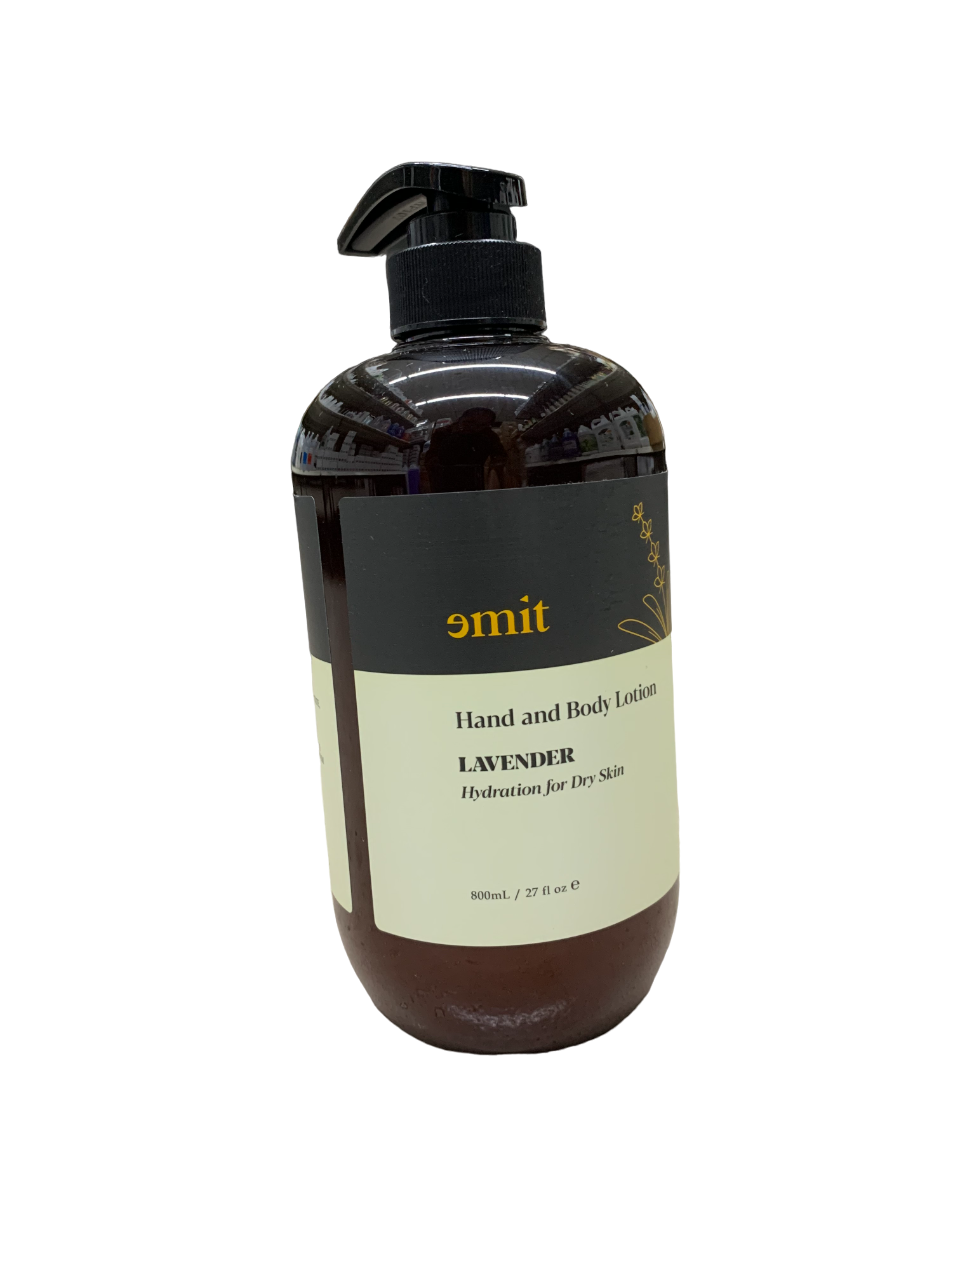 Emit Hand and Body Lotion Lavender